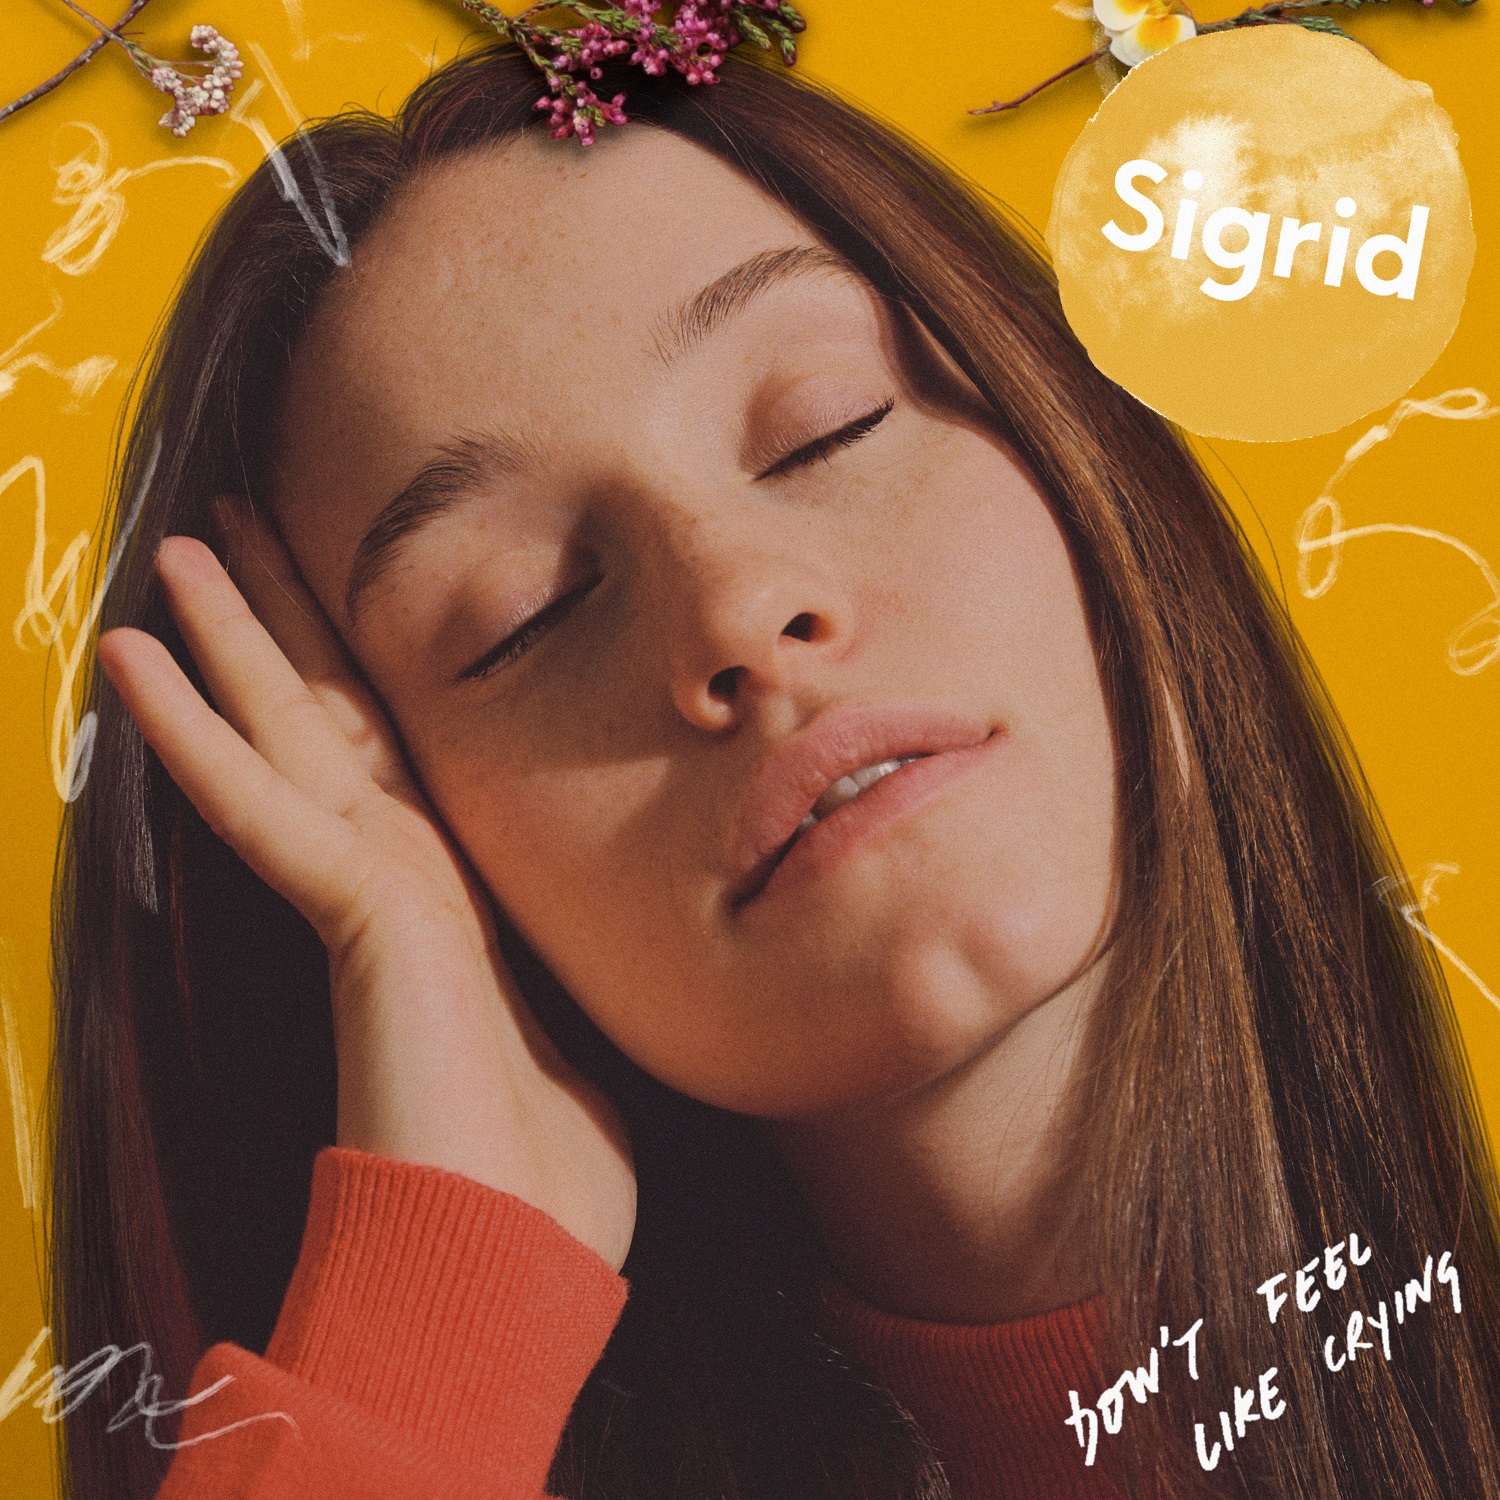 Sigrid - Don't Feel Like Crying cover